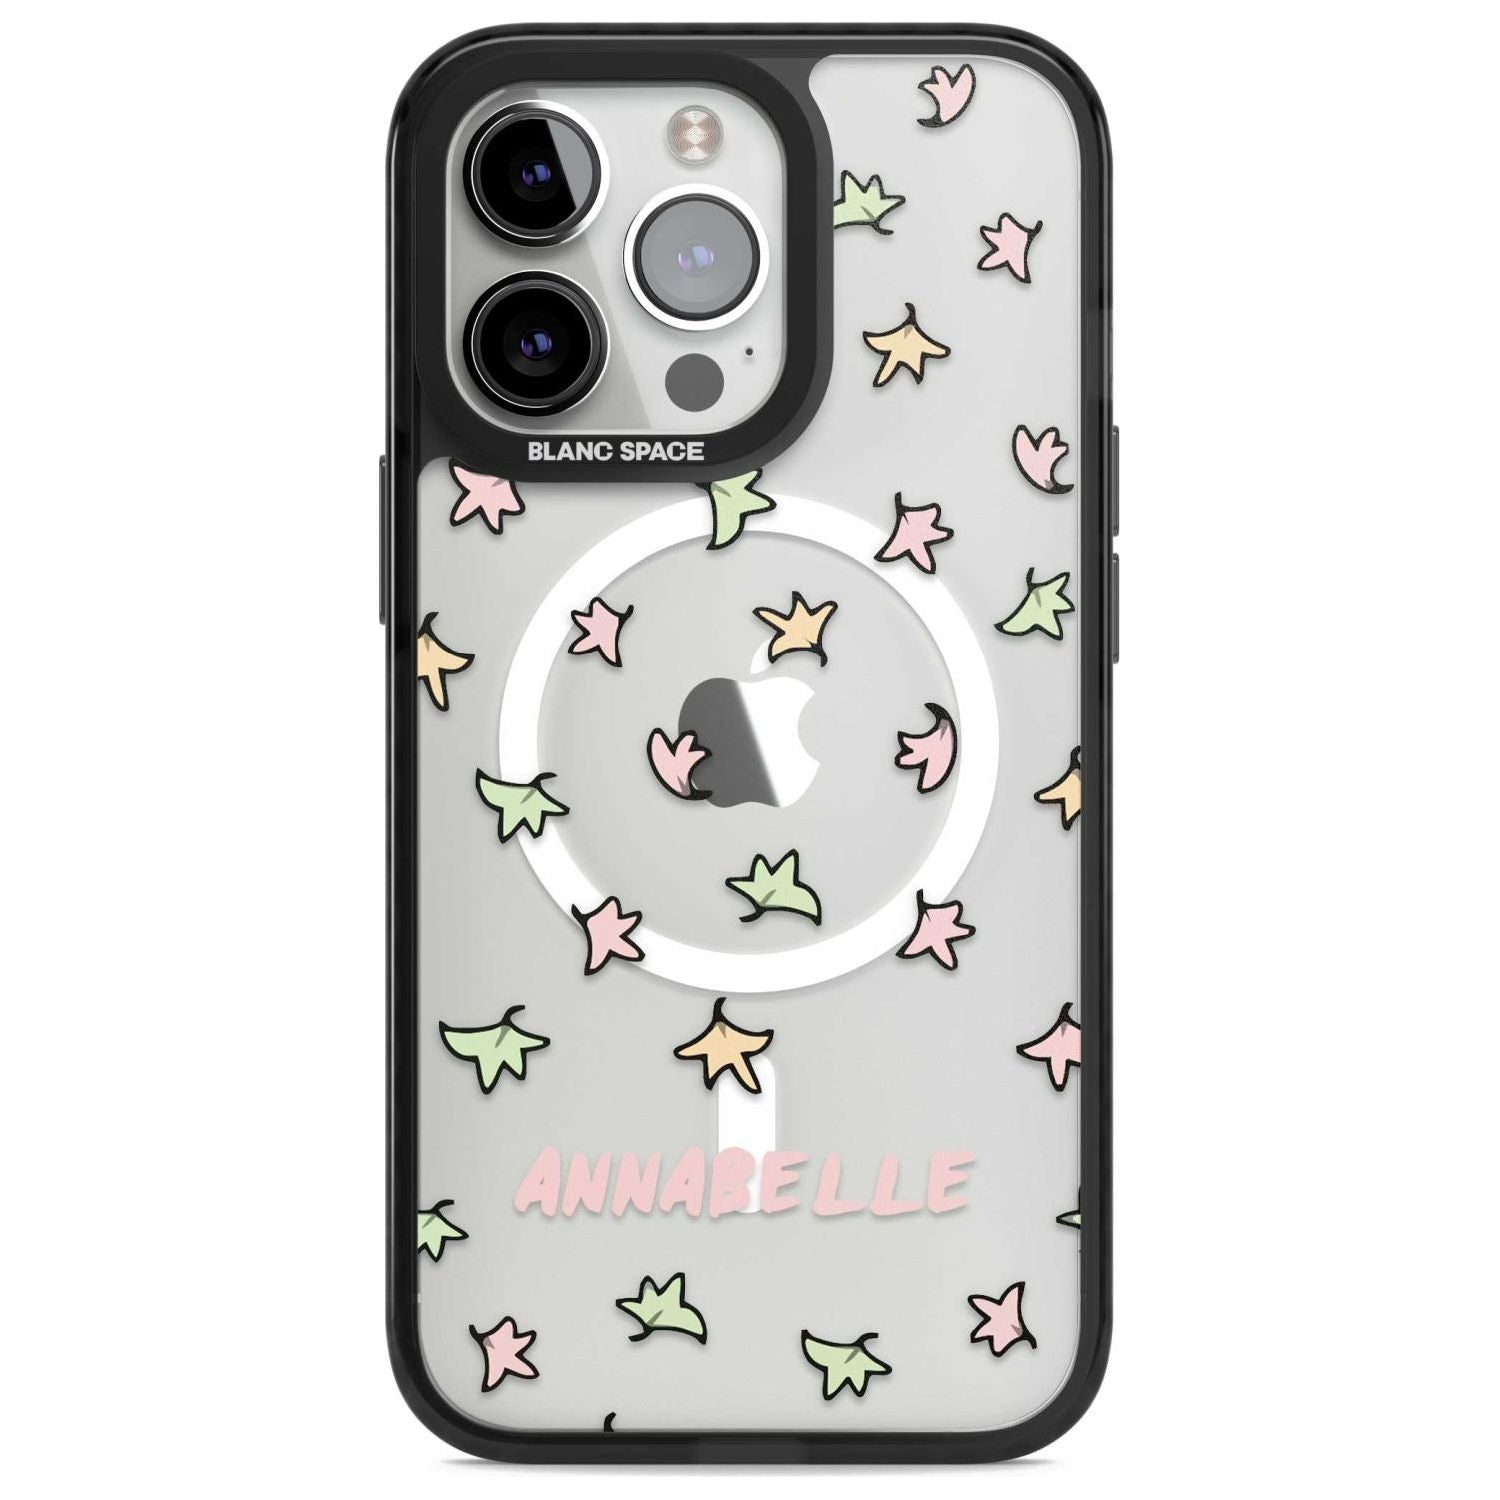 Personalised Heartstopper Leaves Pattern Custom Phone Case iPhone 15 Pro Max / Magsafe Black Impact Case,iPhone 15 Pro / Magsafe Black Impact Case,iPhone 14 Pro Max / Magsafe Black Impact Case,iPhone 14 Pro / Magsafe Black Impact Case,iPhone 13 Pro / Magsafe Black Impact Case Blanc Space